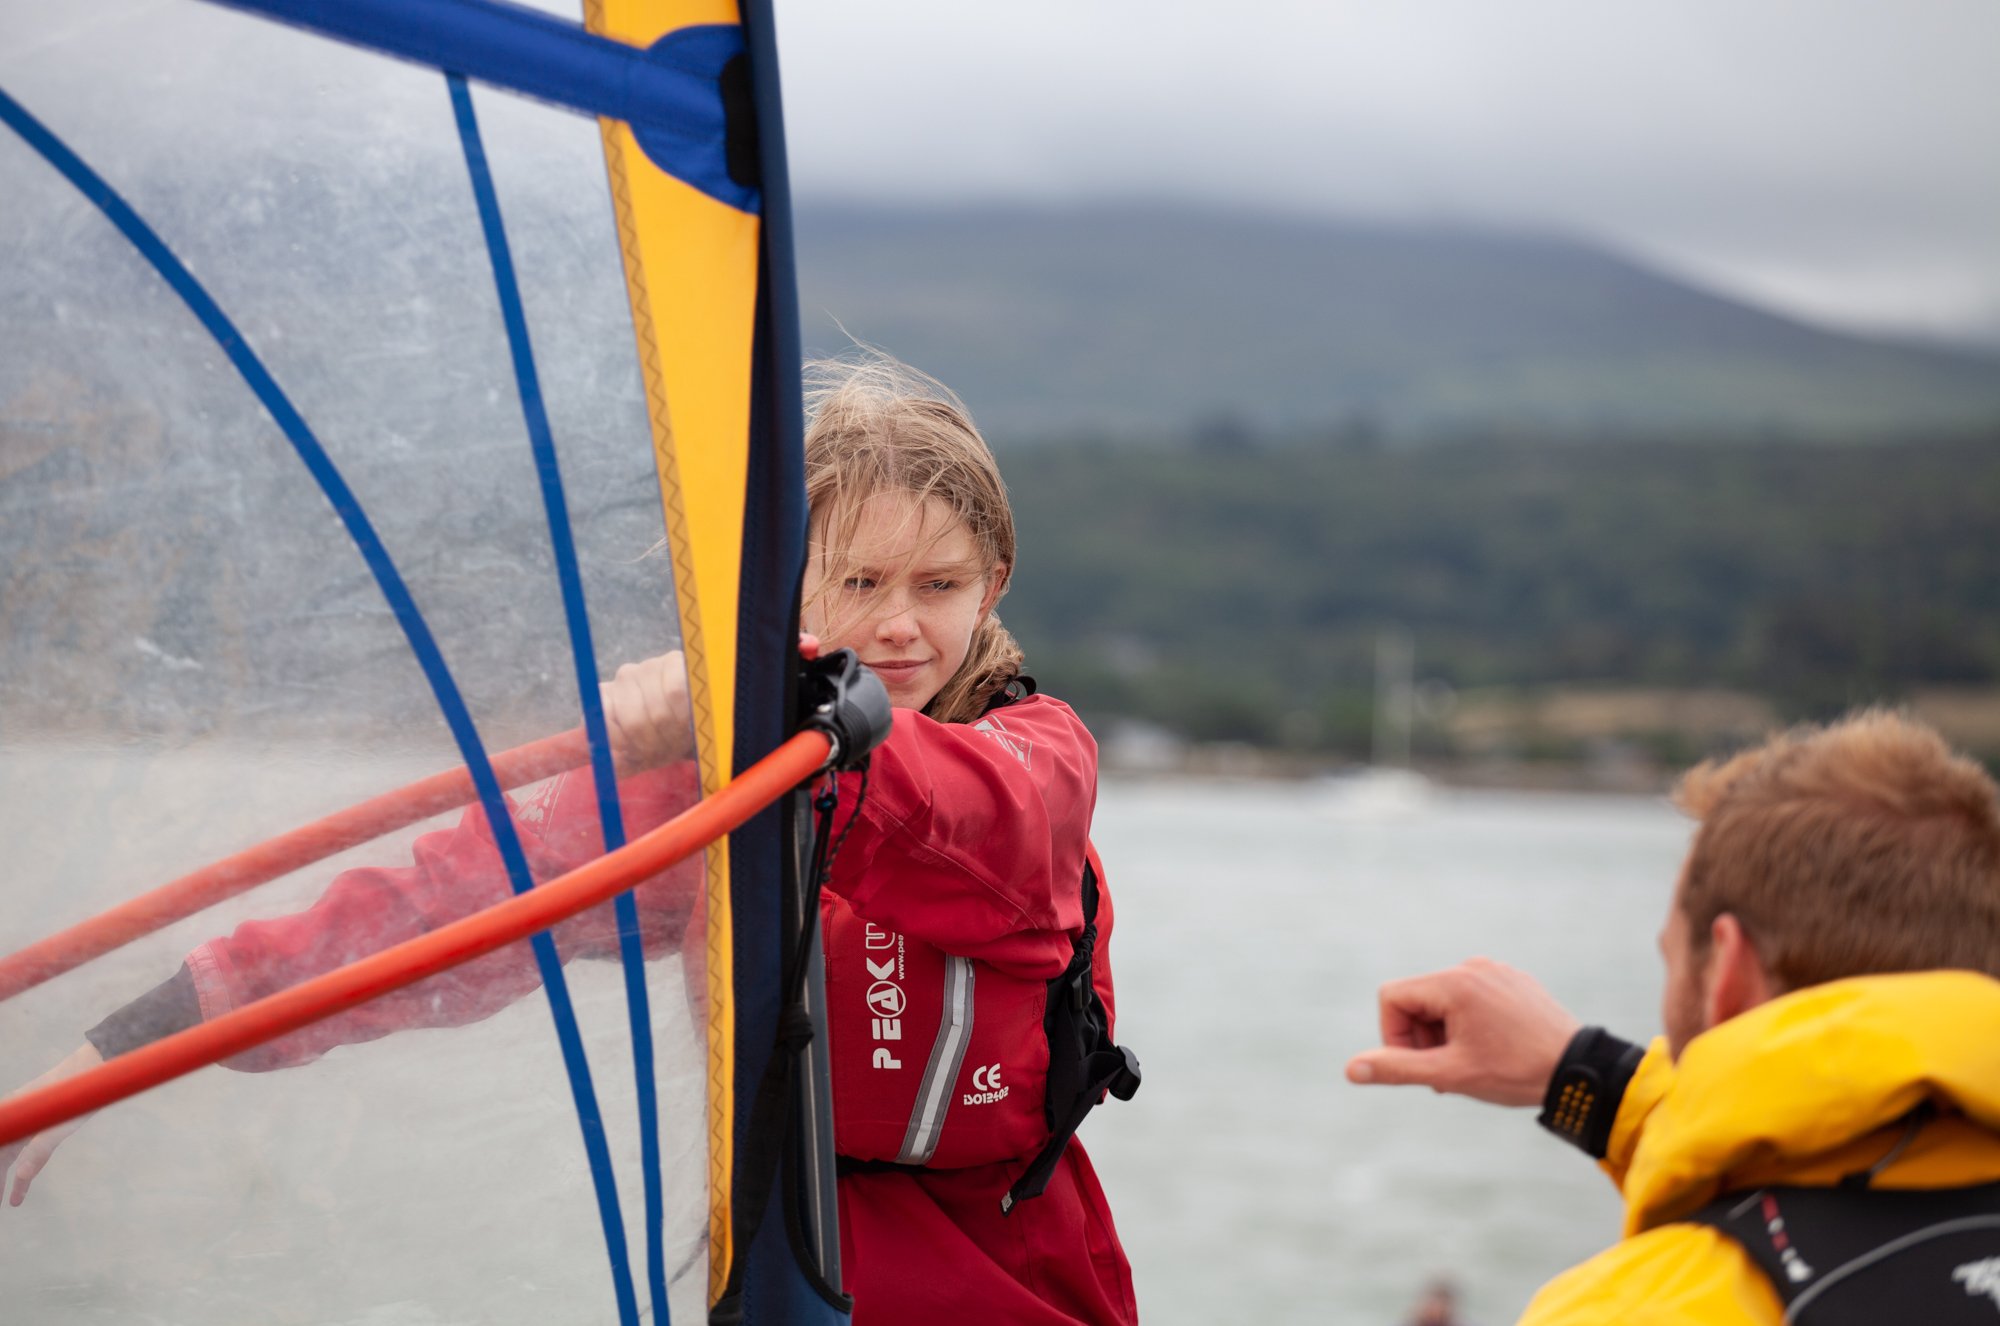 Instruction in windsurfing for all abilities - beginners to advanced